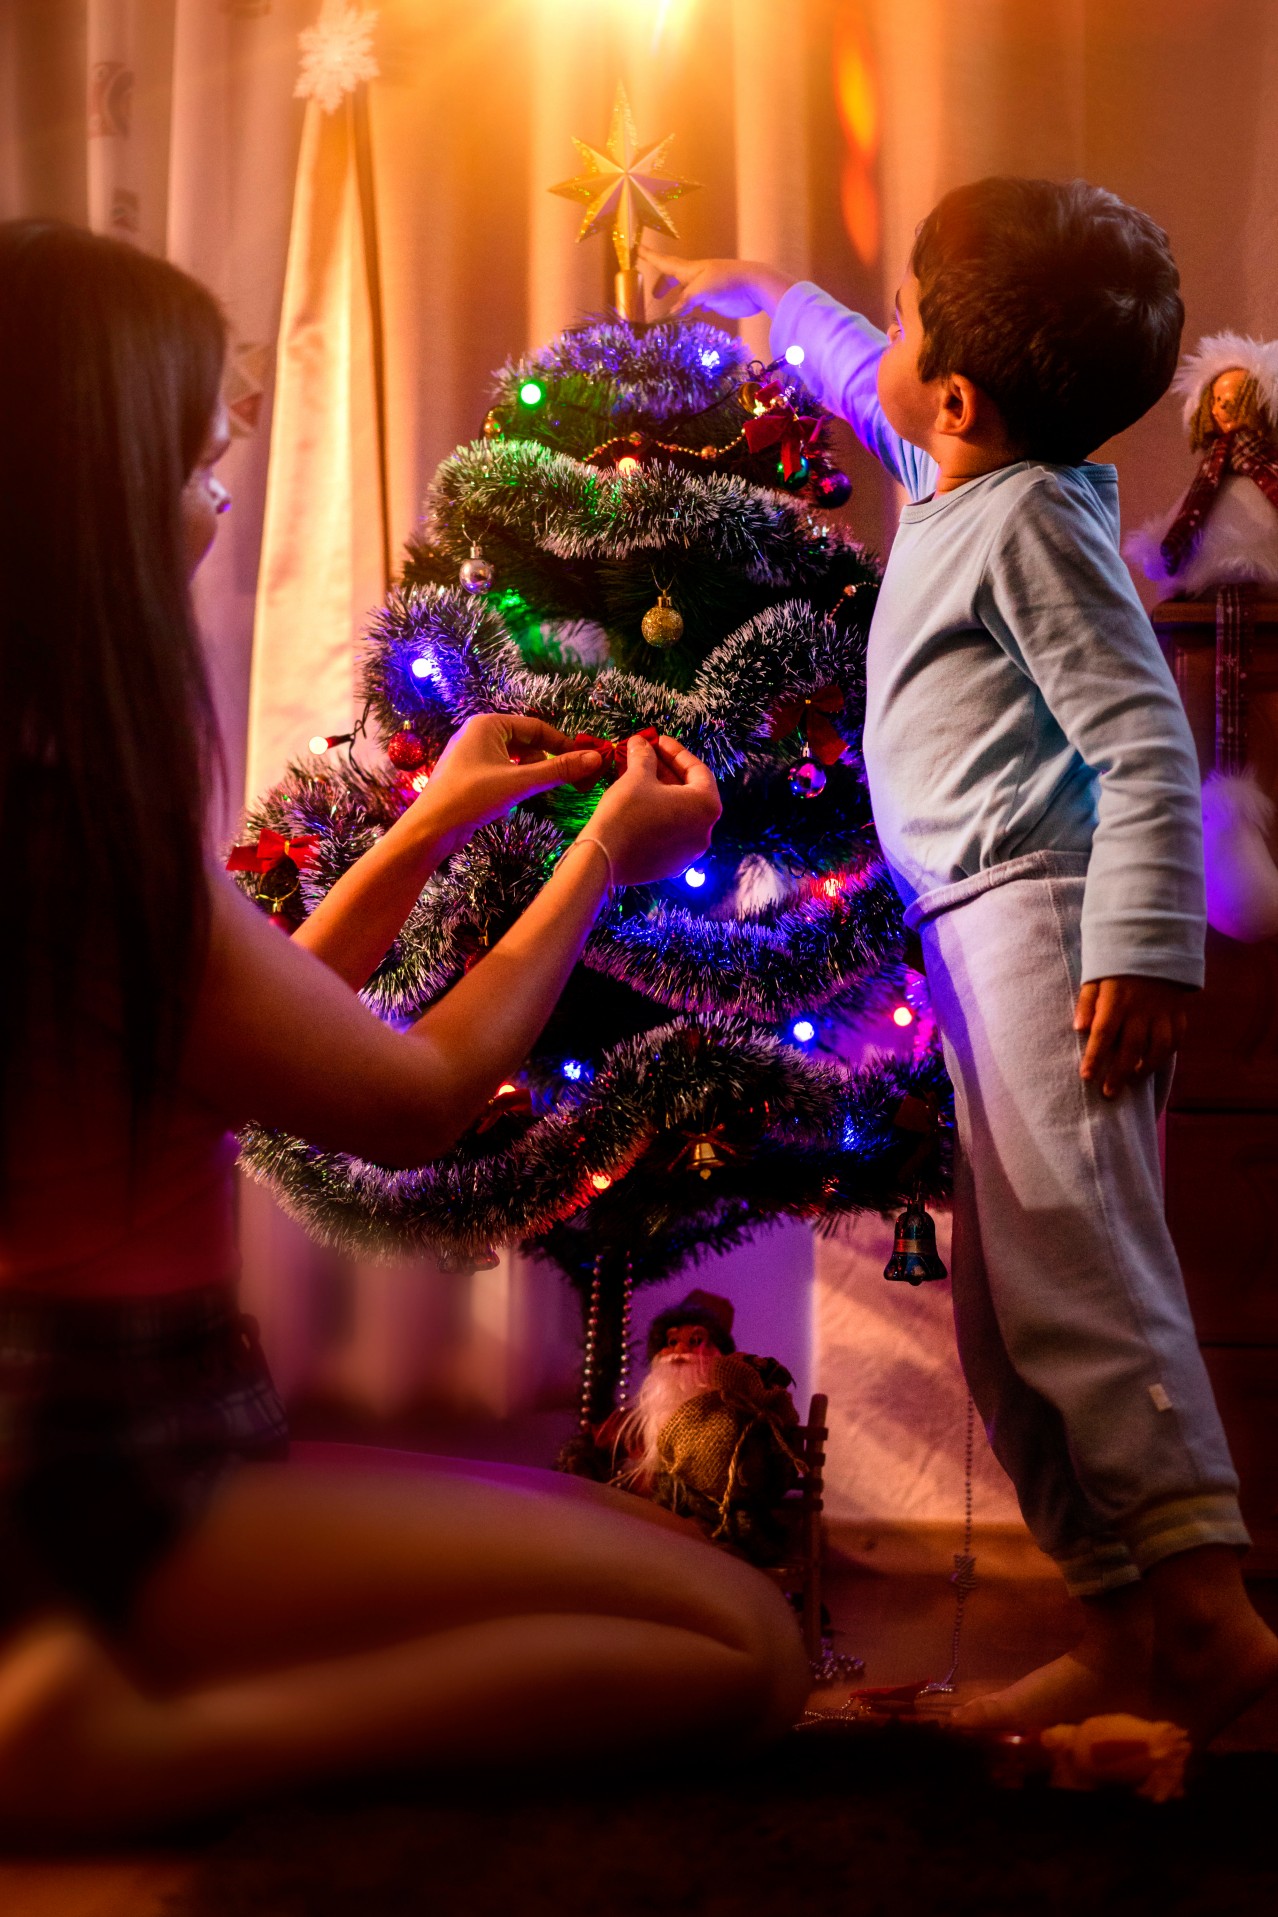 Woman and kid decorating Christmas tree together